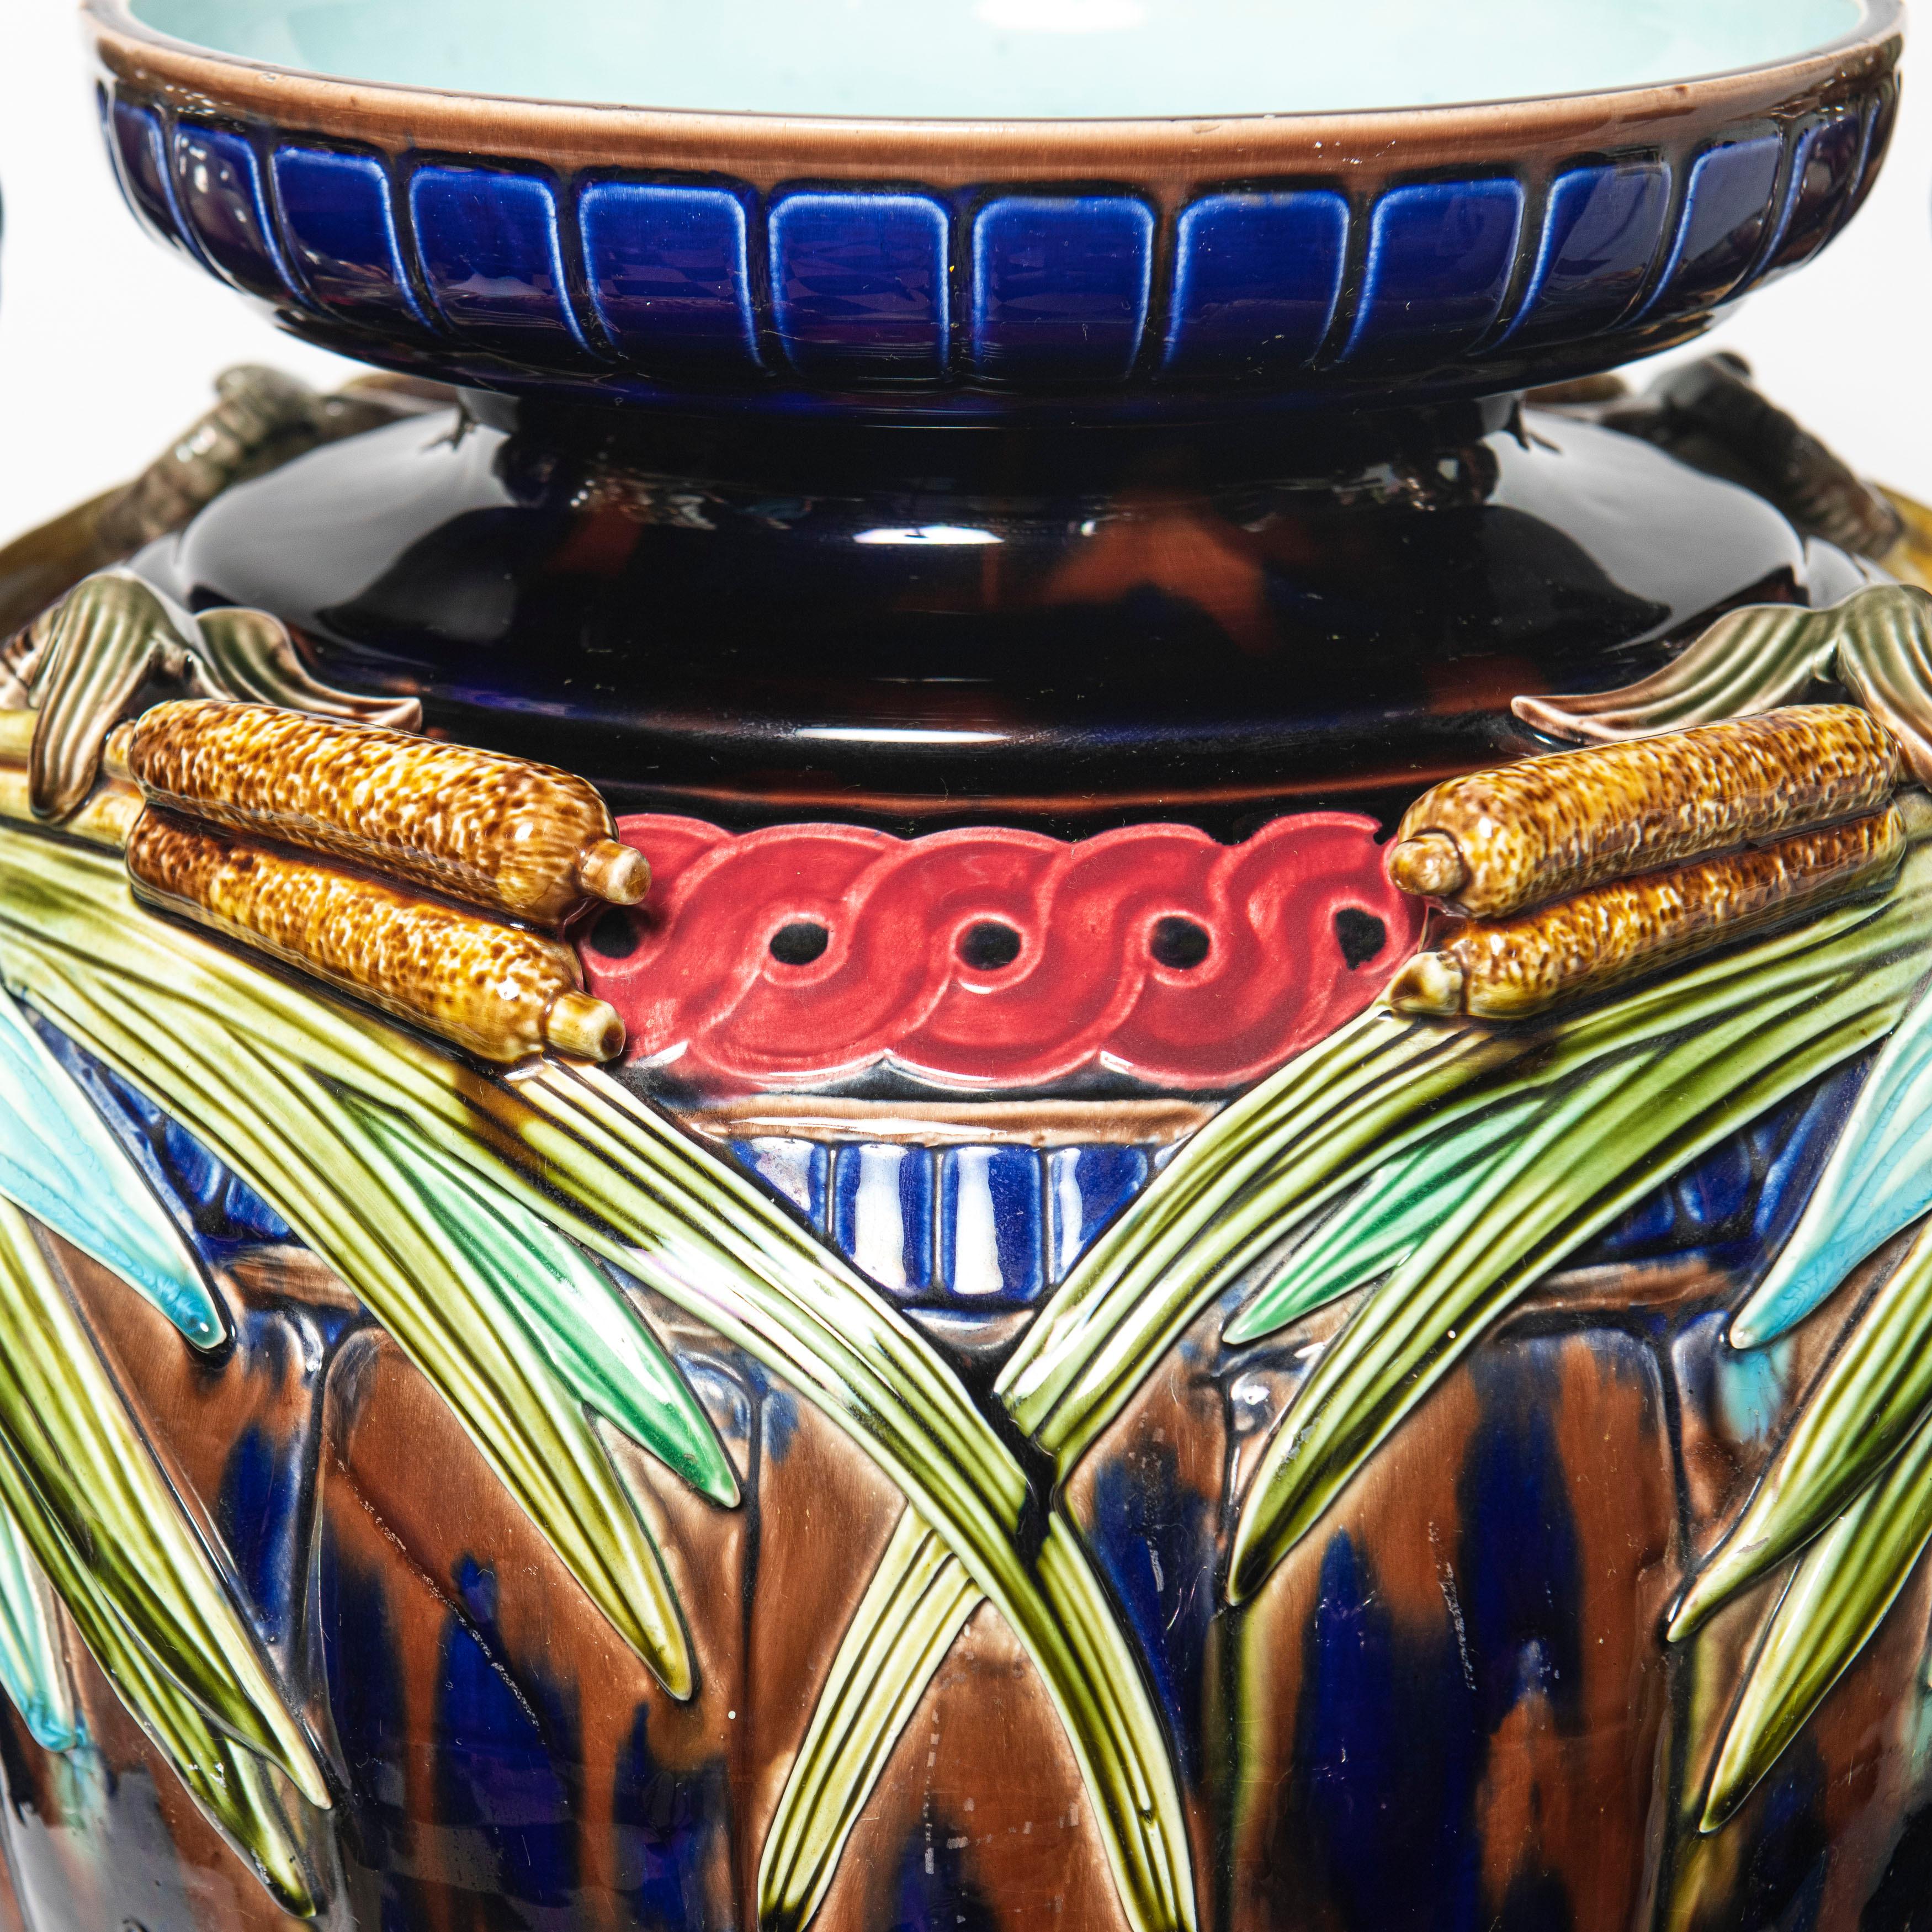 Late 19th Century Ceramic Vase Attributted to Sarreguemines, Art Nouveau Period, France, C. 1890 For Sale